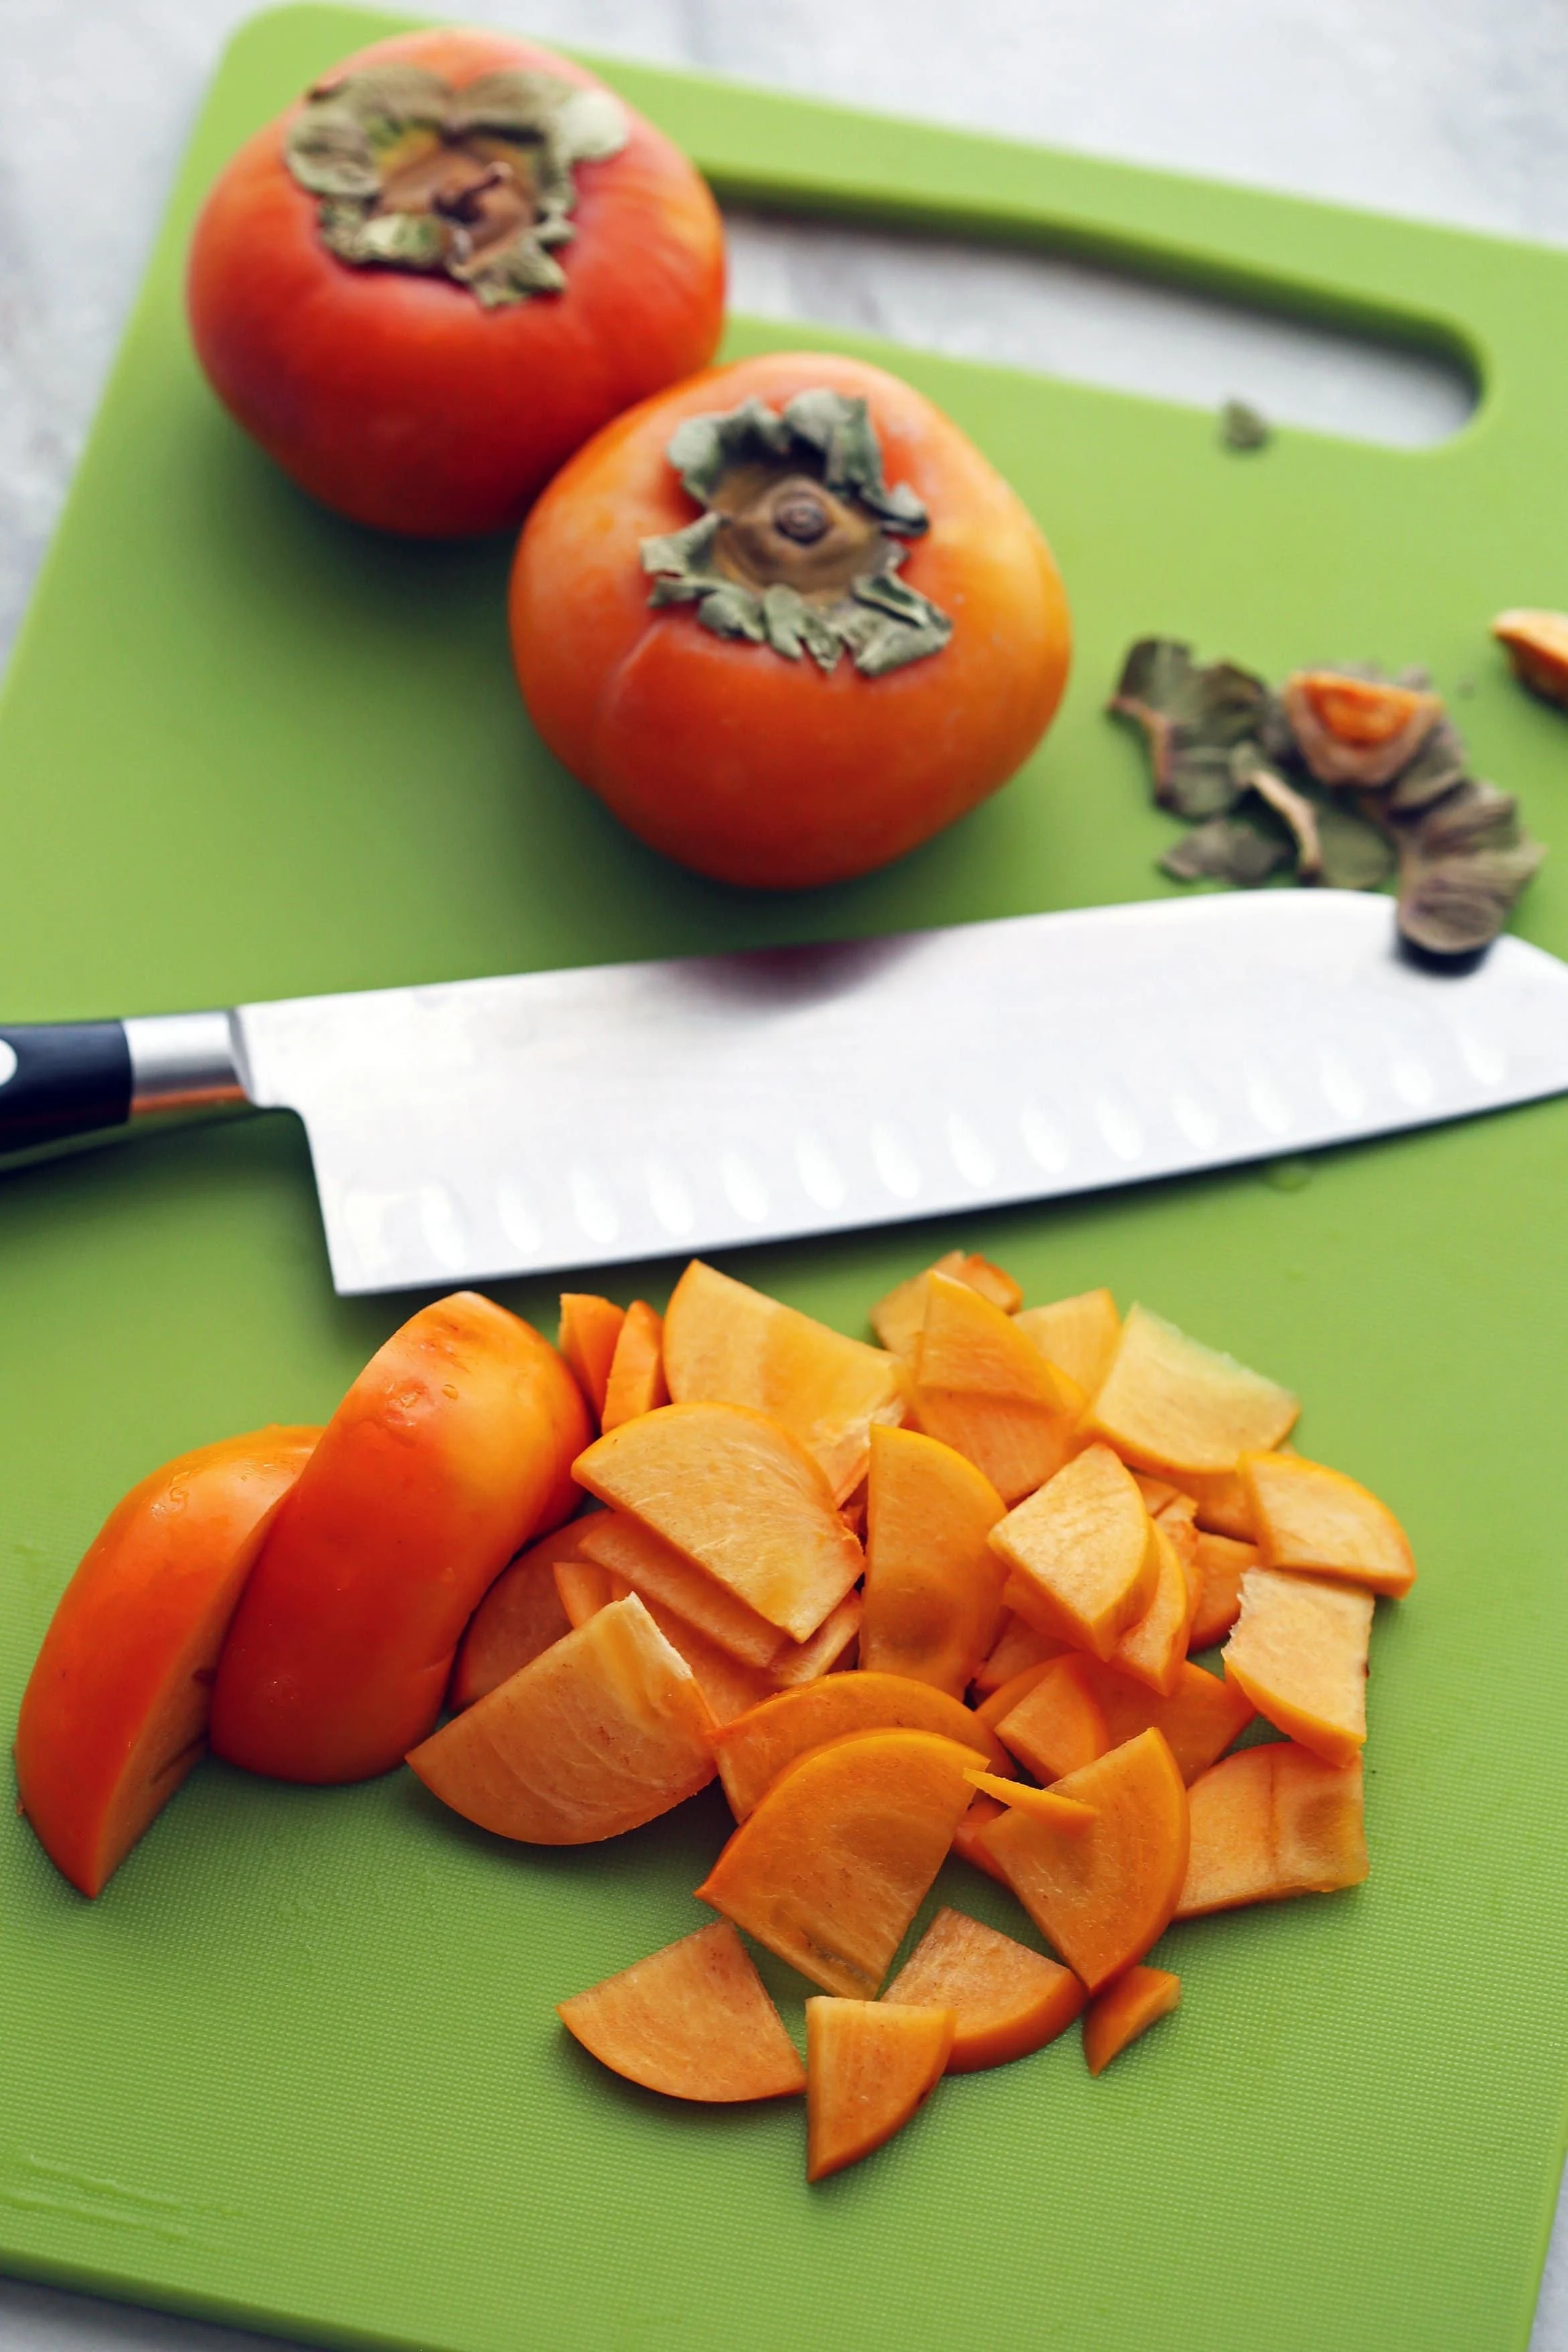 Sliced and whole persimmon fruit and a knife on a green cutting board.